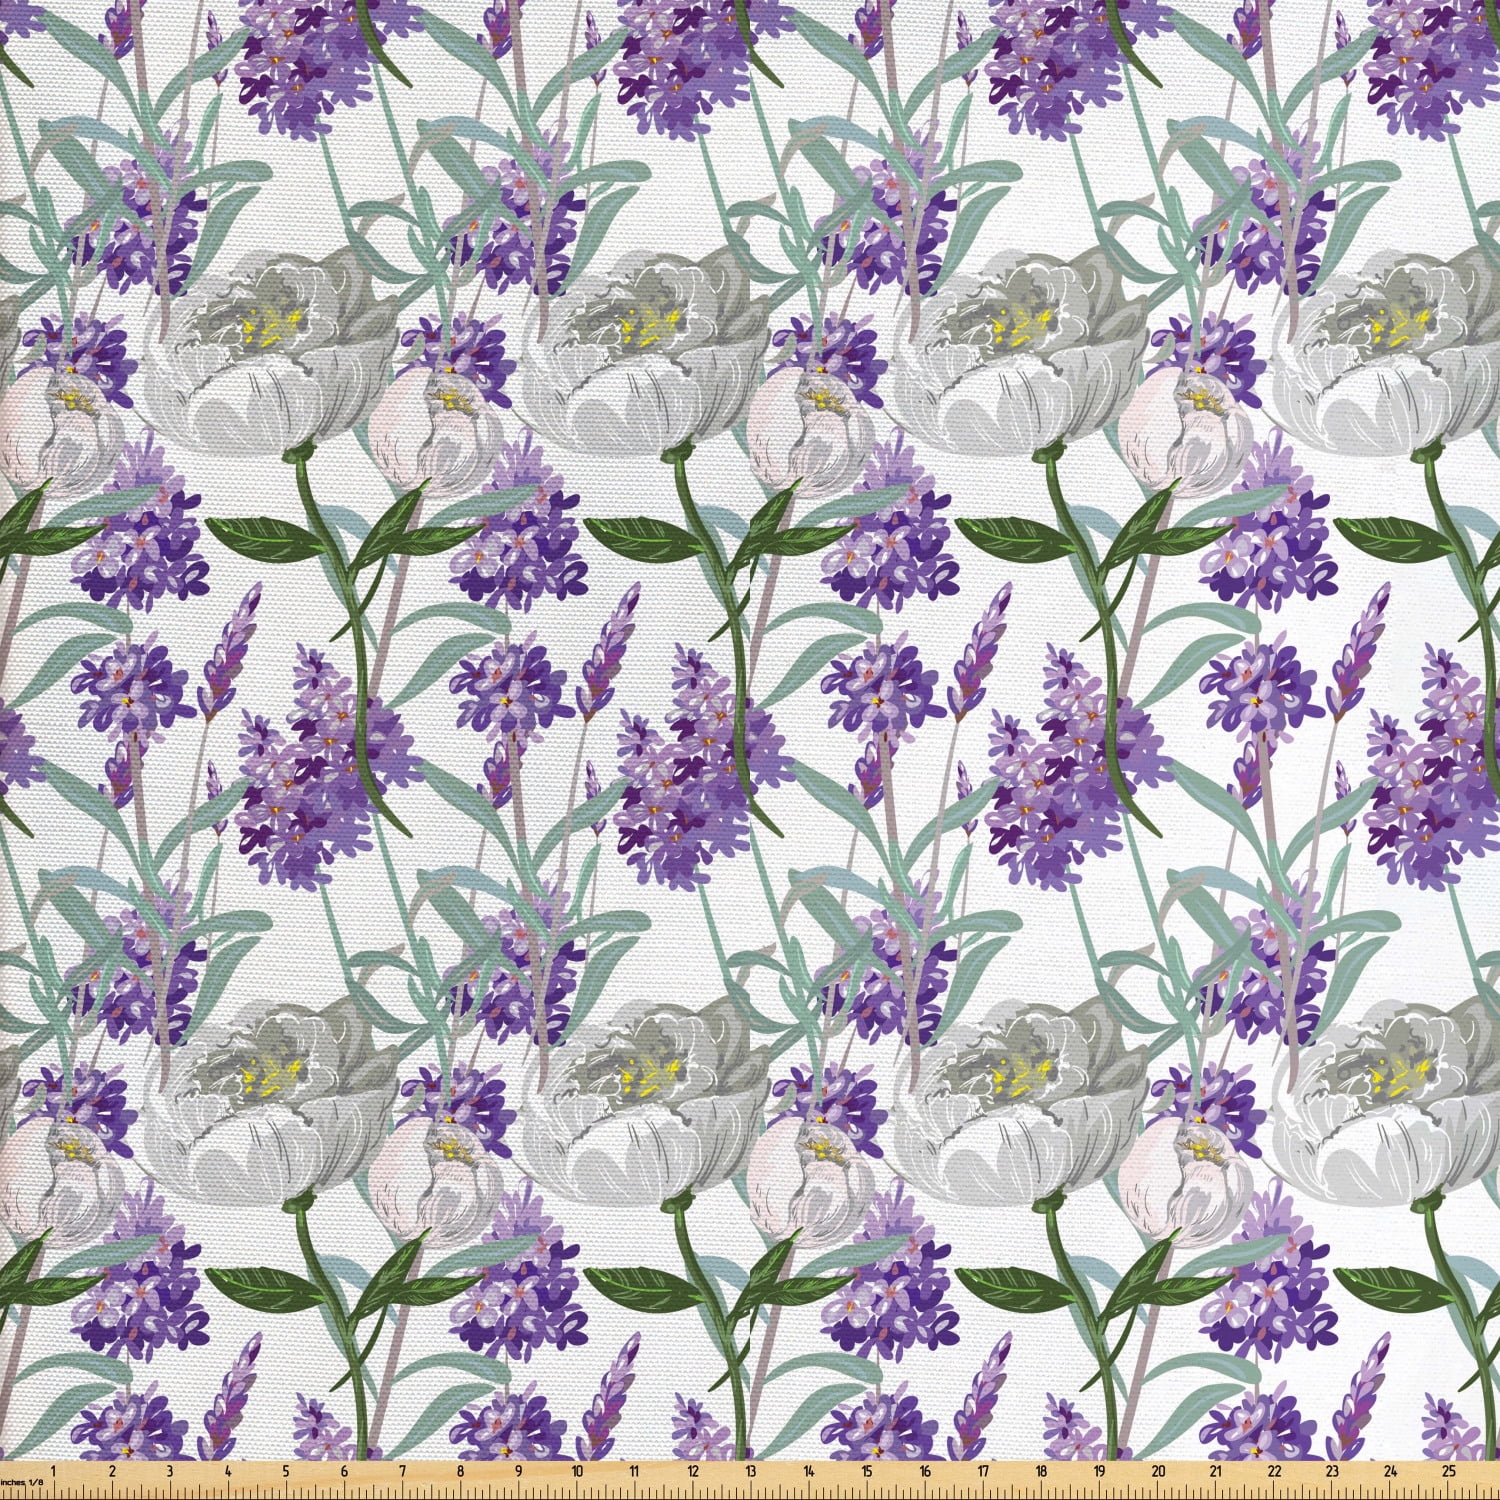 Hyacinth Patterned Digital Printed Fabric Upholstery Fabric Home Decor